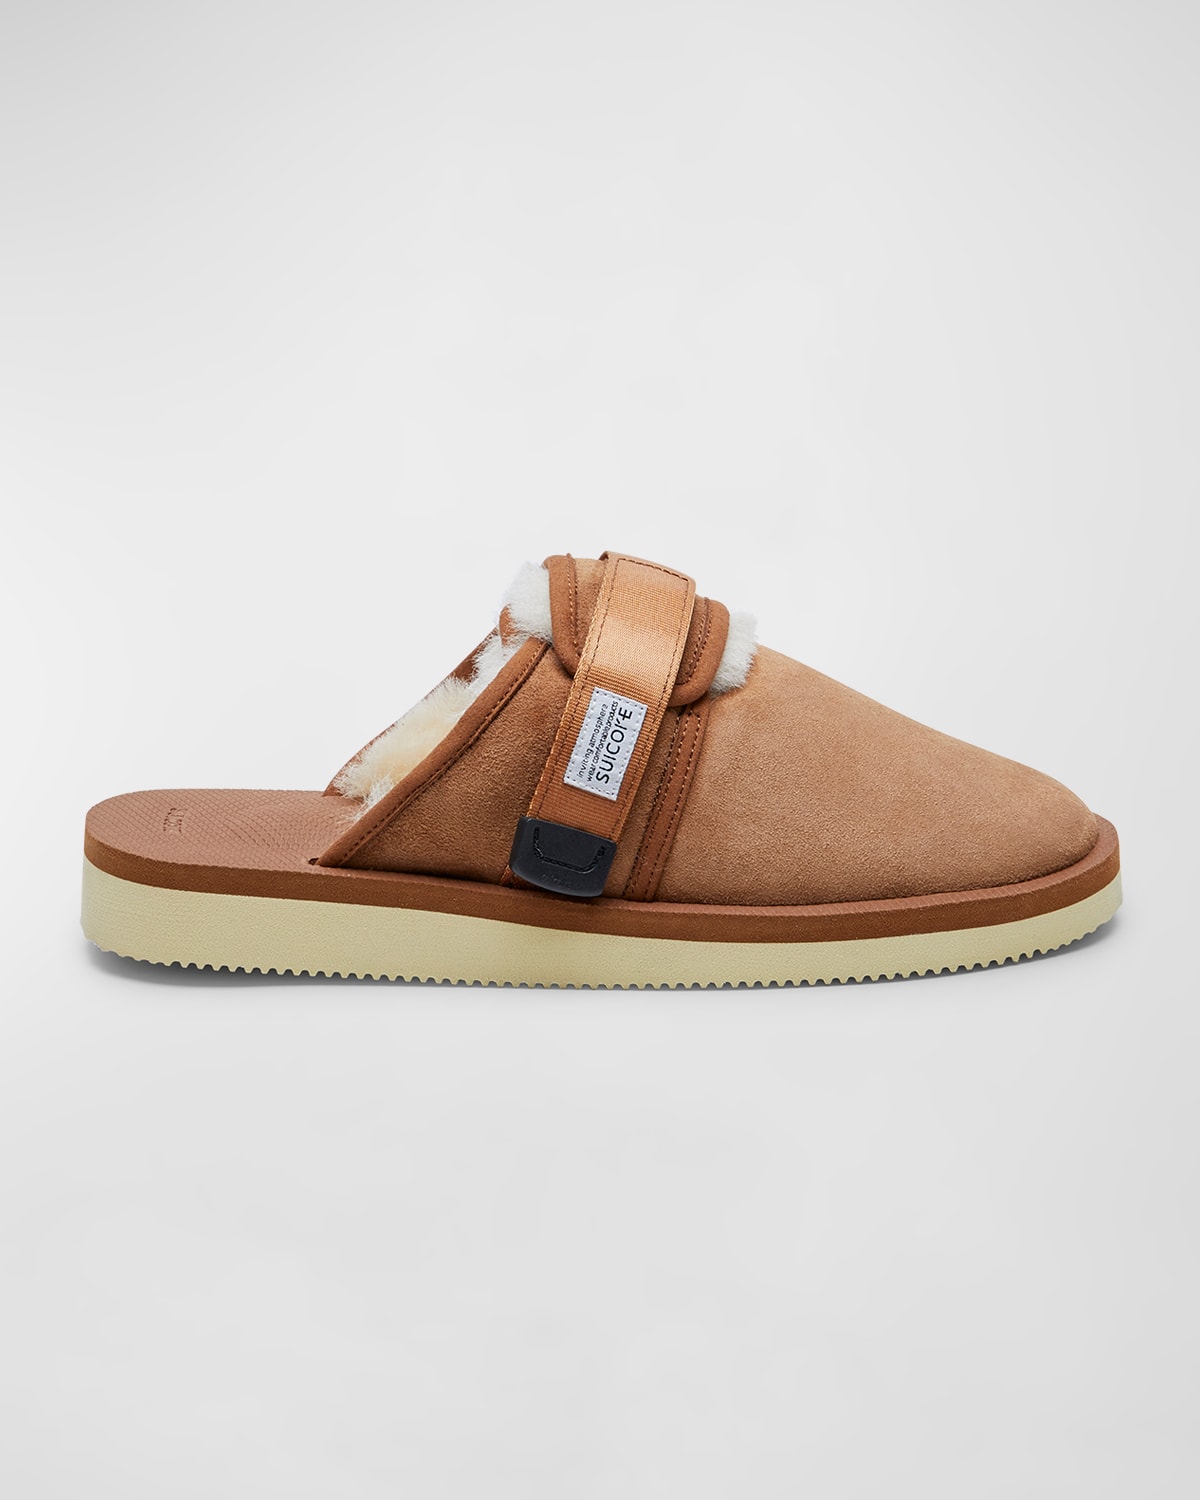 Men's ZAVO-M2ab Shearling-Lined Suede Slipper Mules